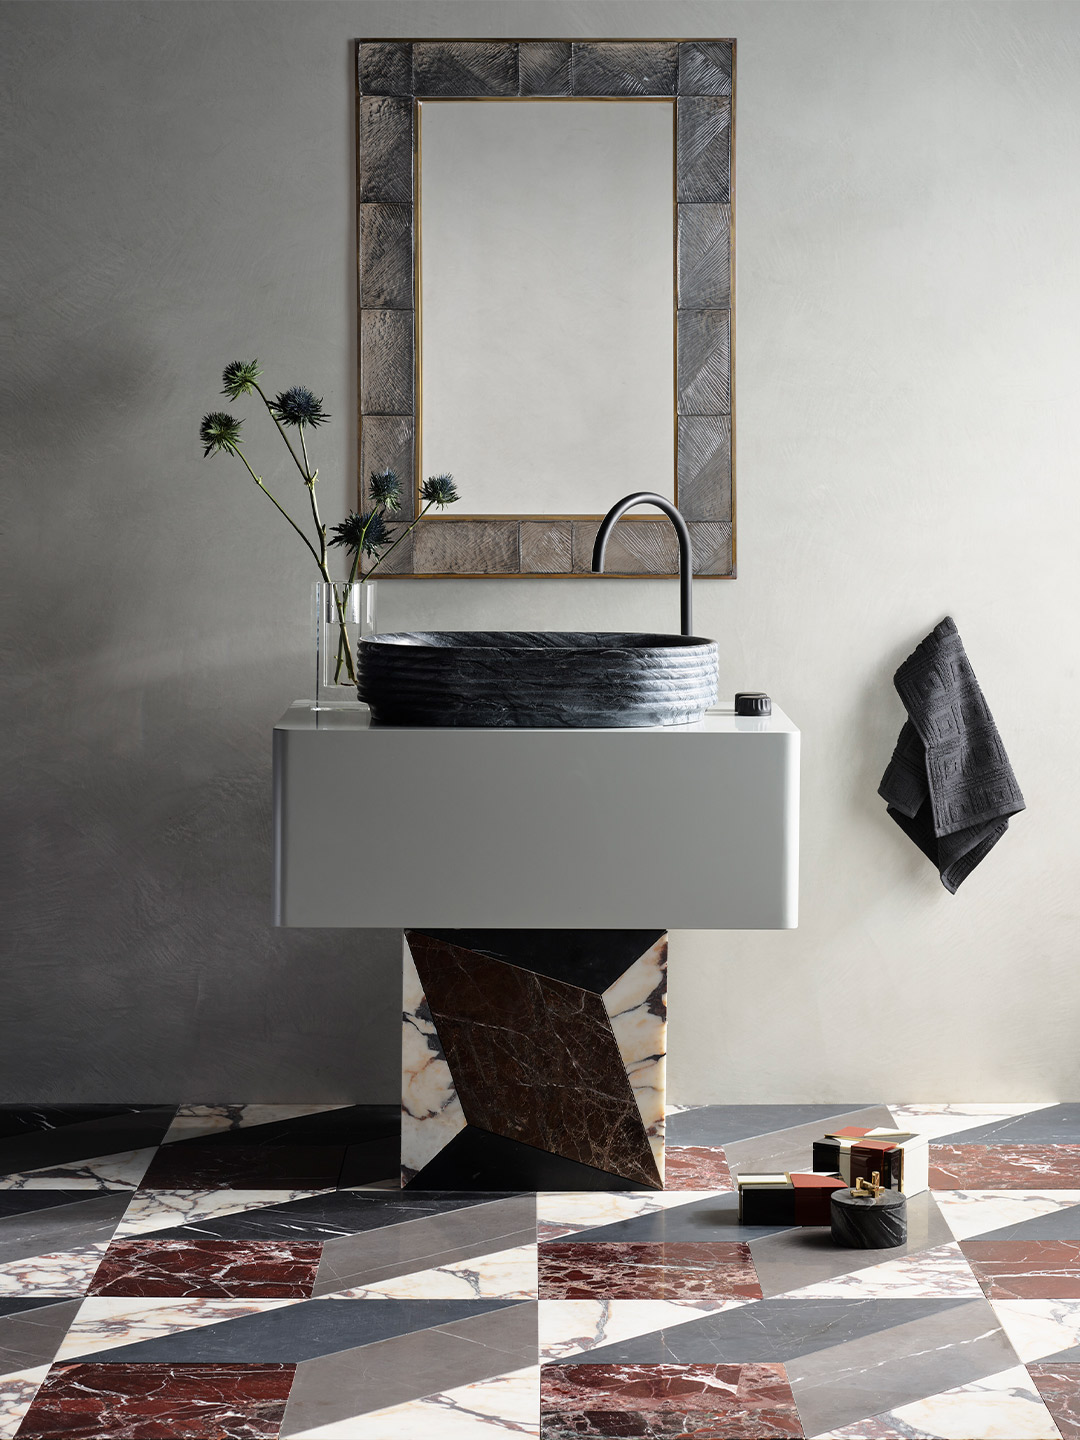 Largo collection of stone washbasins and tiles by Greg Natale for Teranova